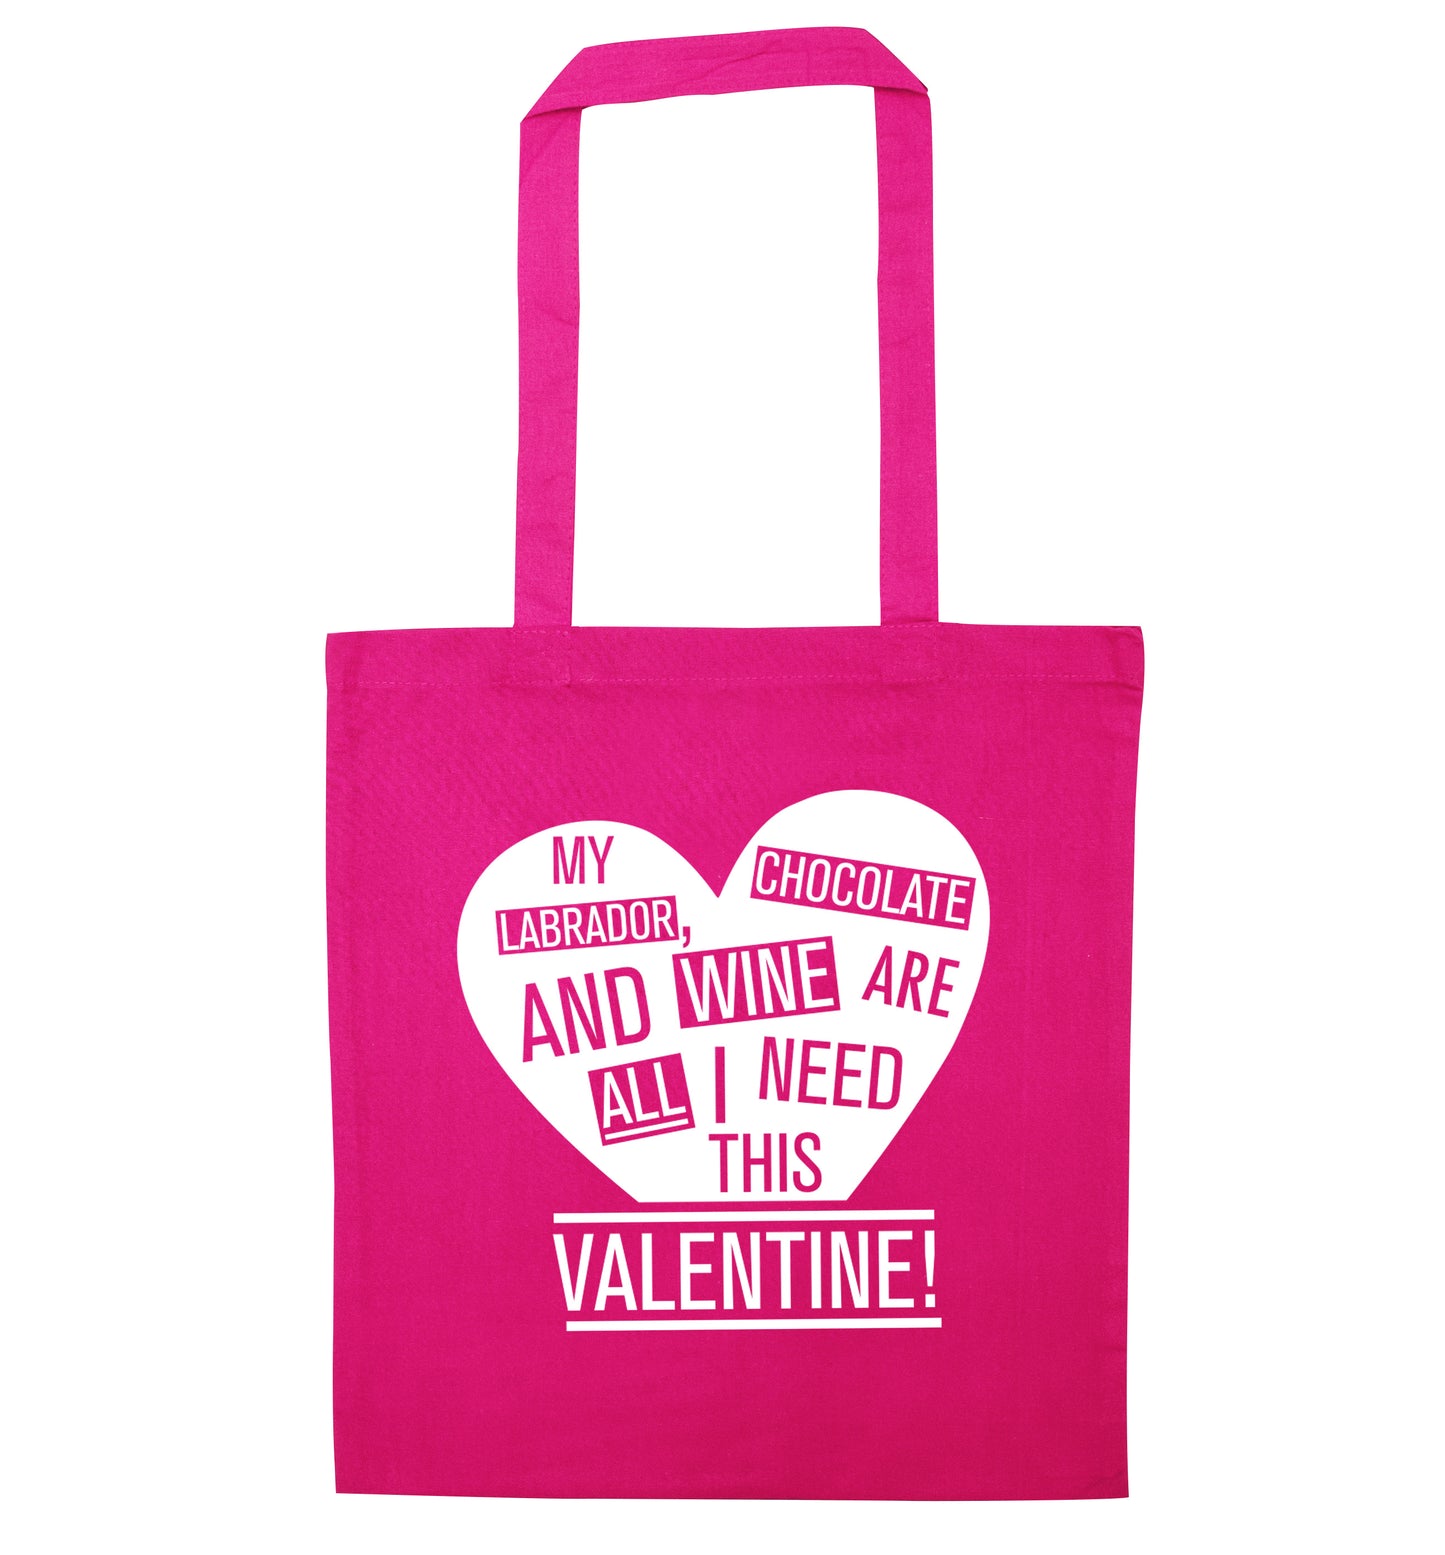 My labrador, chocolate and wine are all I need this valentine! pink tote bag